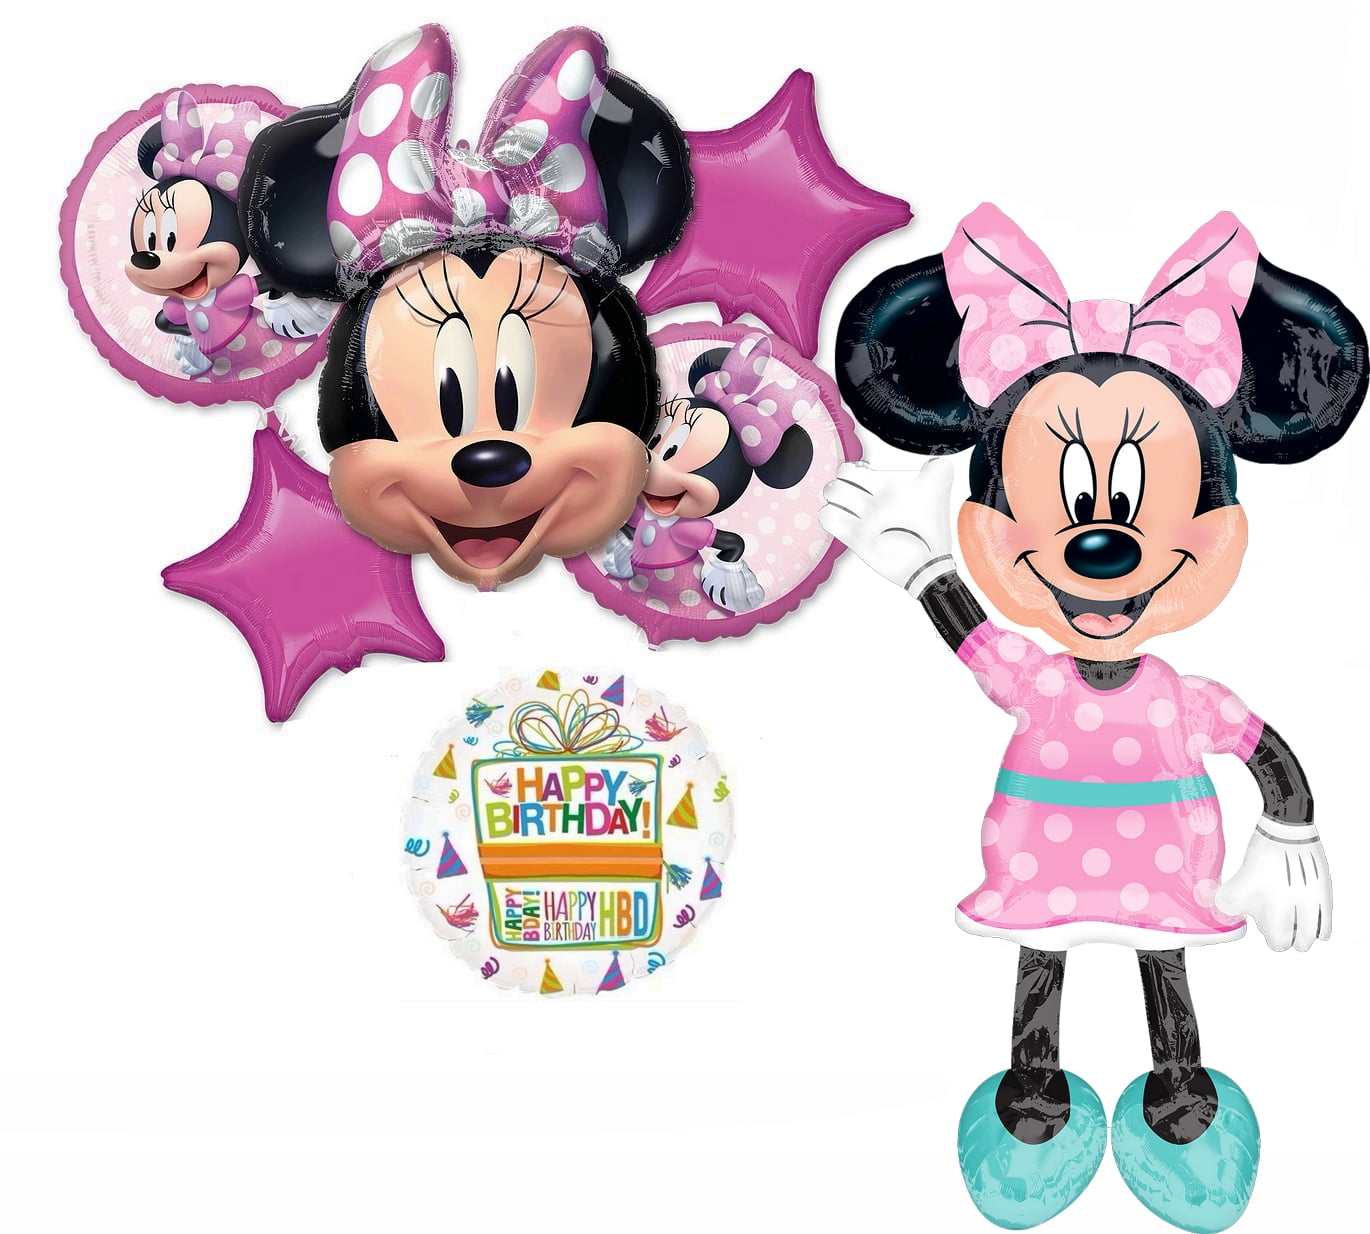 New Minnie Mouse Balloon Drop Birthday Party Decorations Games Pink Balloons 